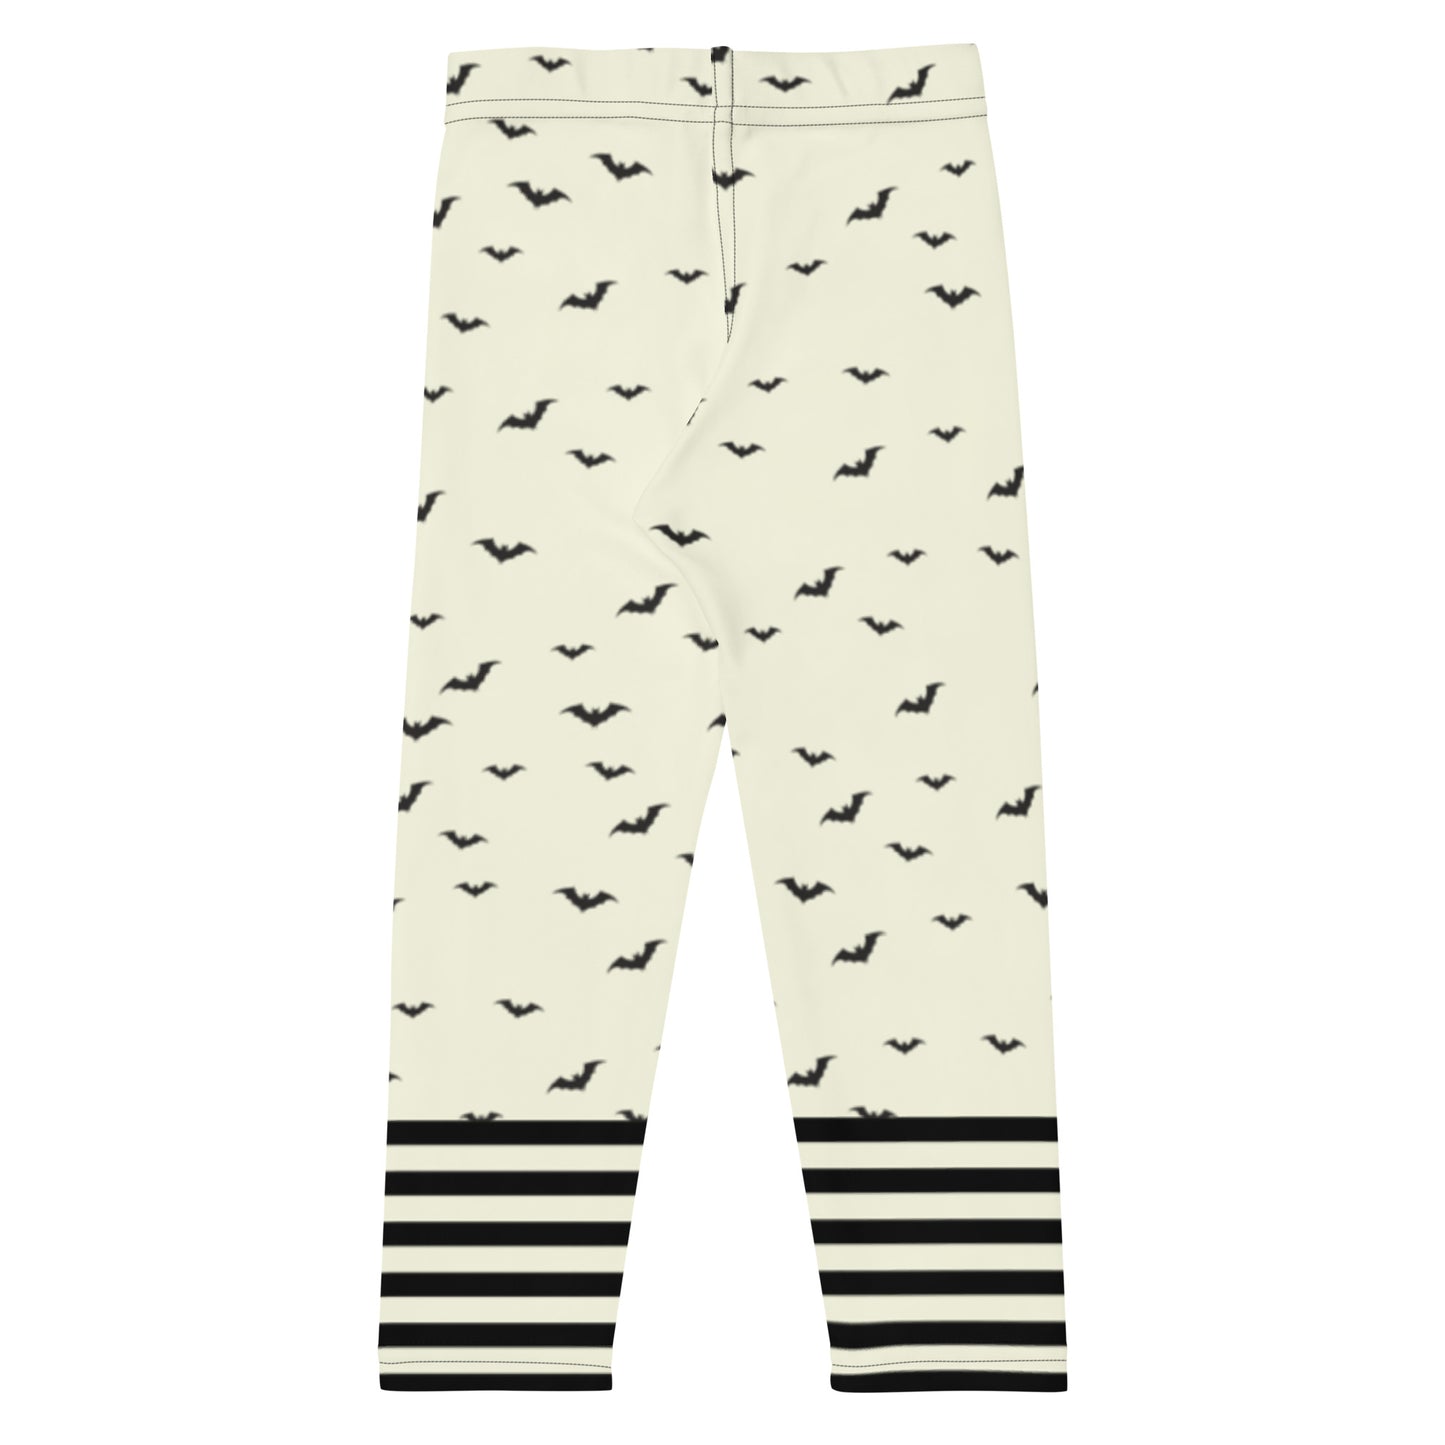 Flying Bat Cream and Black Striped Children's Legging, From the Realm of Halloween Collection